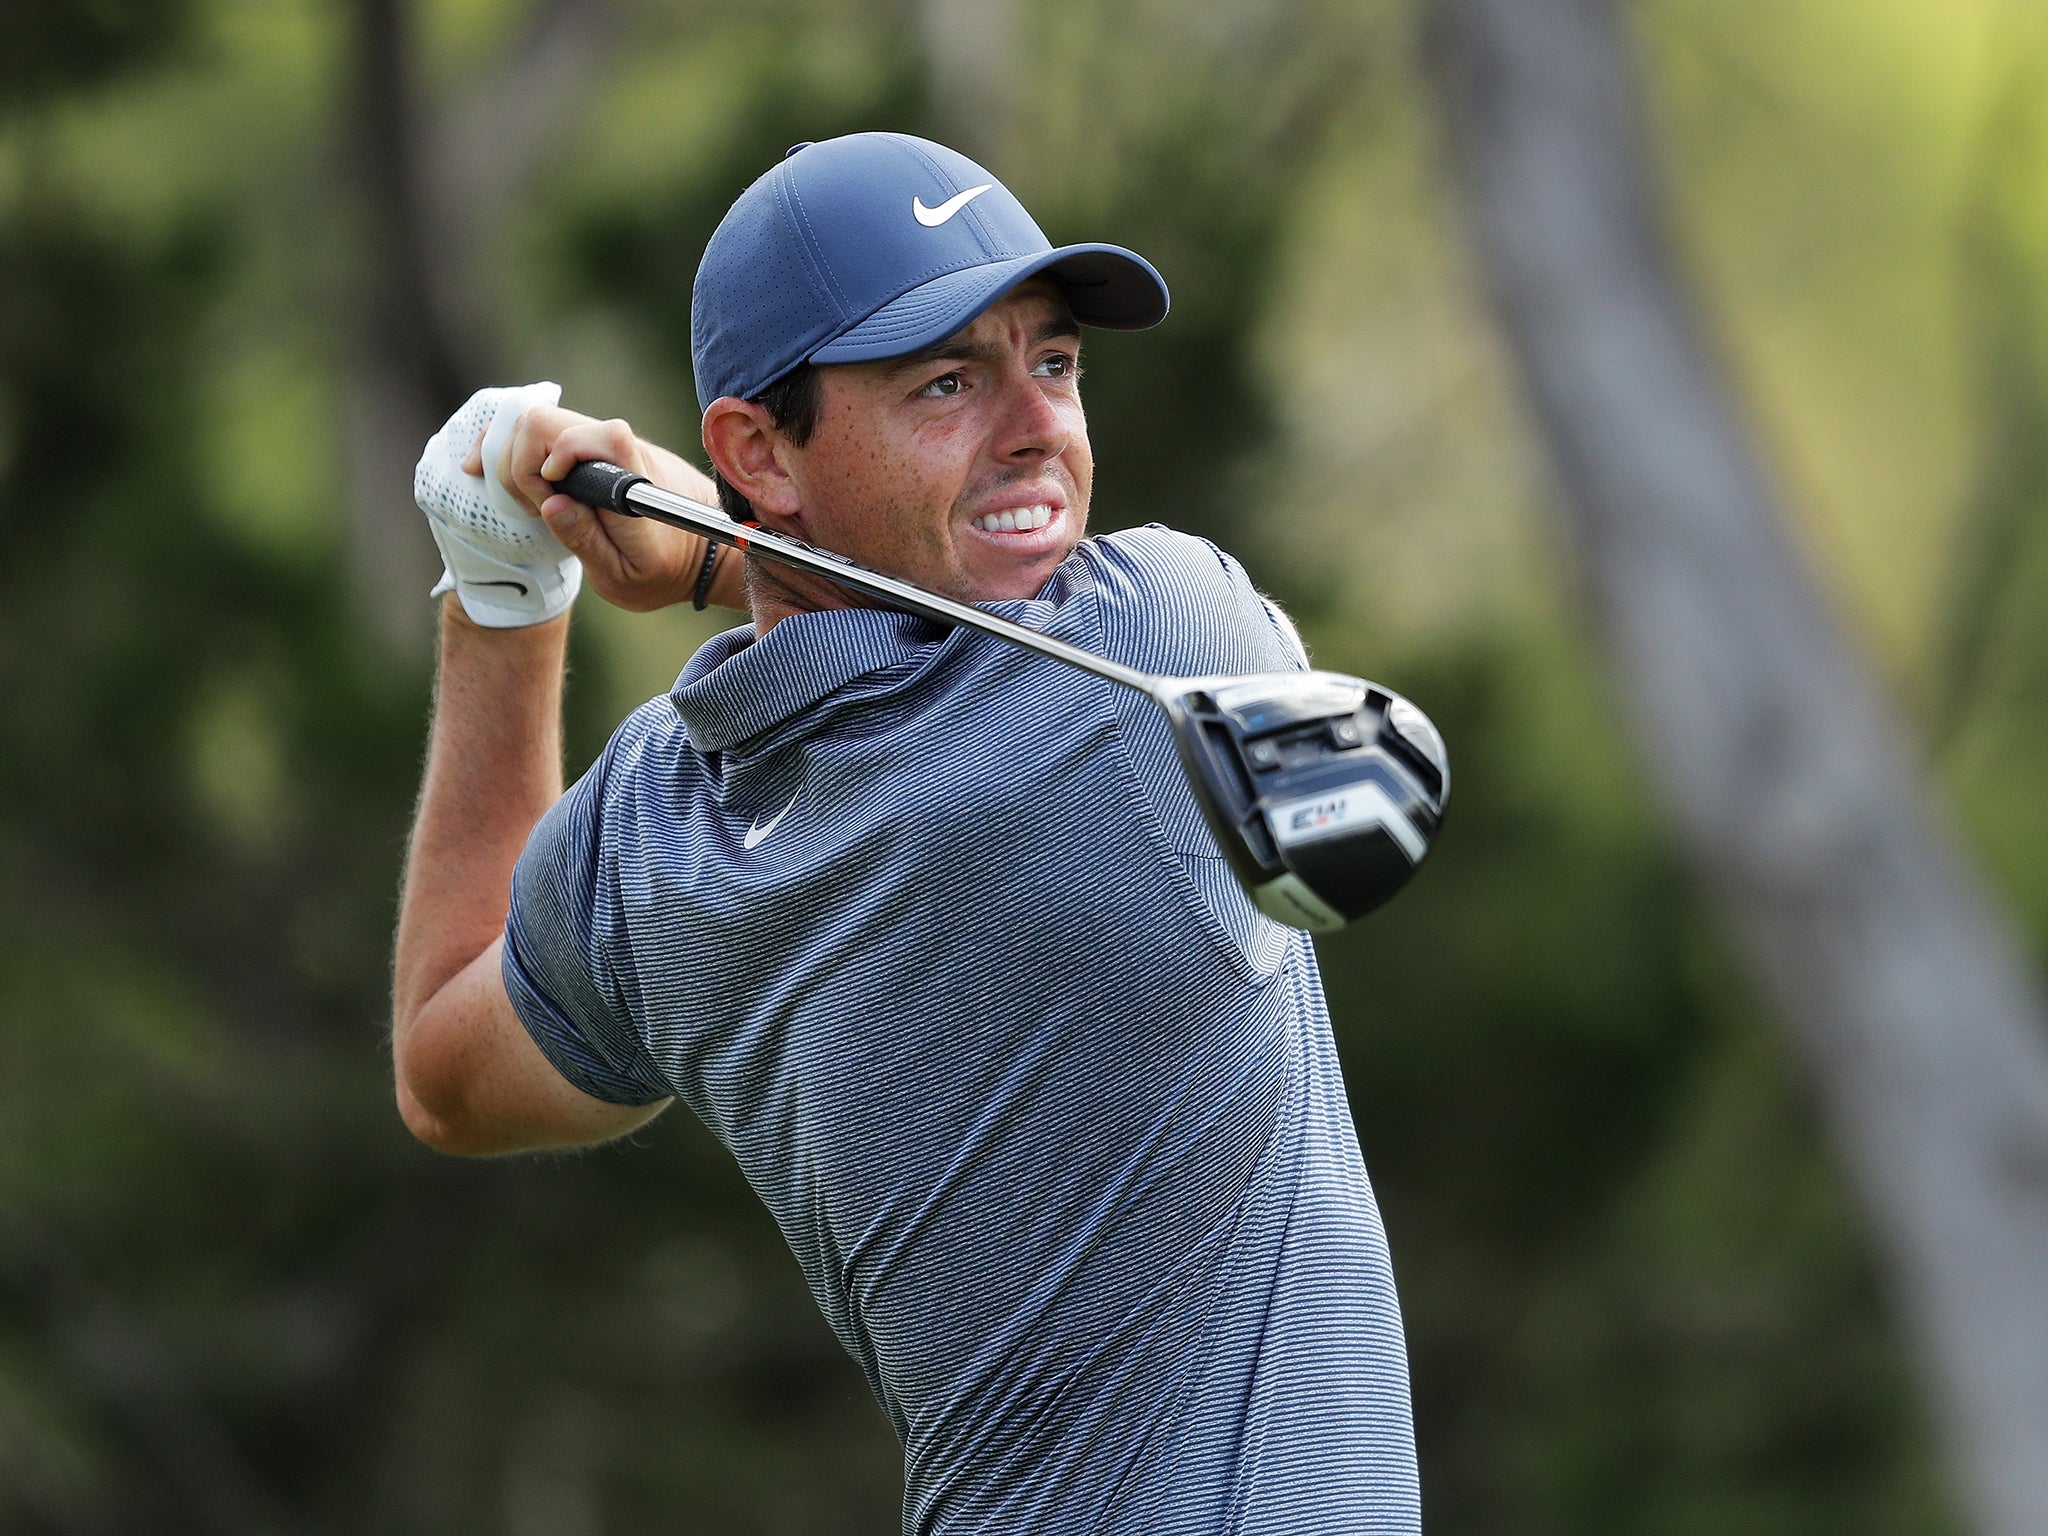 McIlroy is looking to win the Masters for the first time